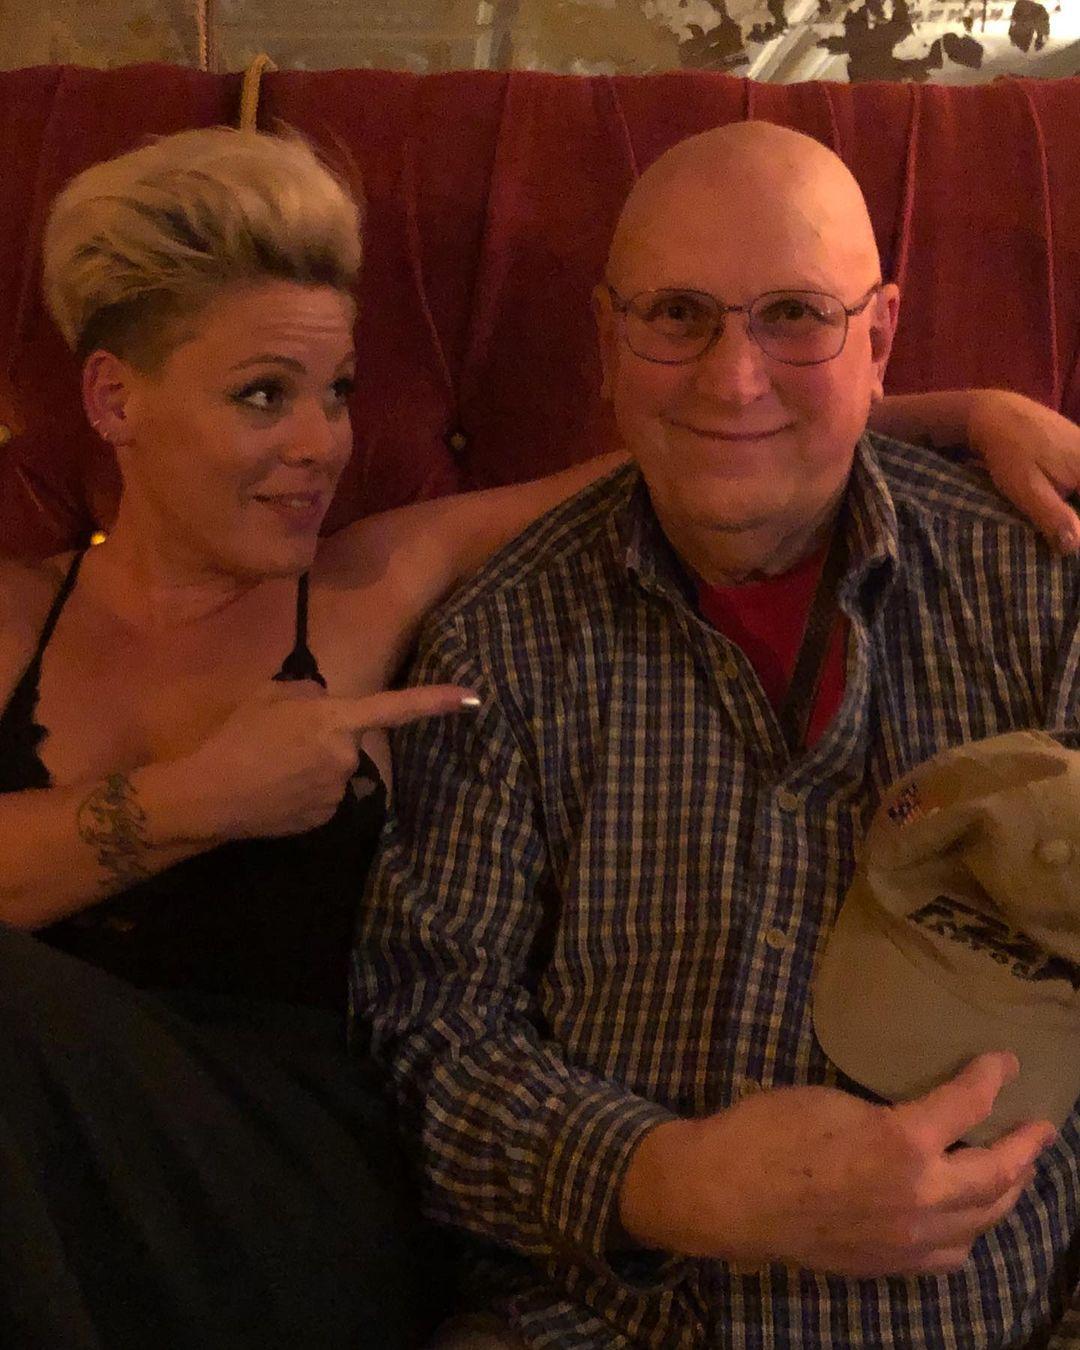 Singer Pink and her father Jim Moore